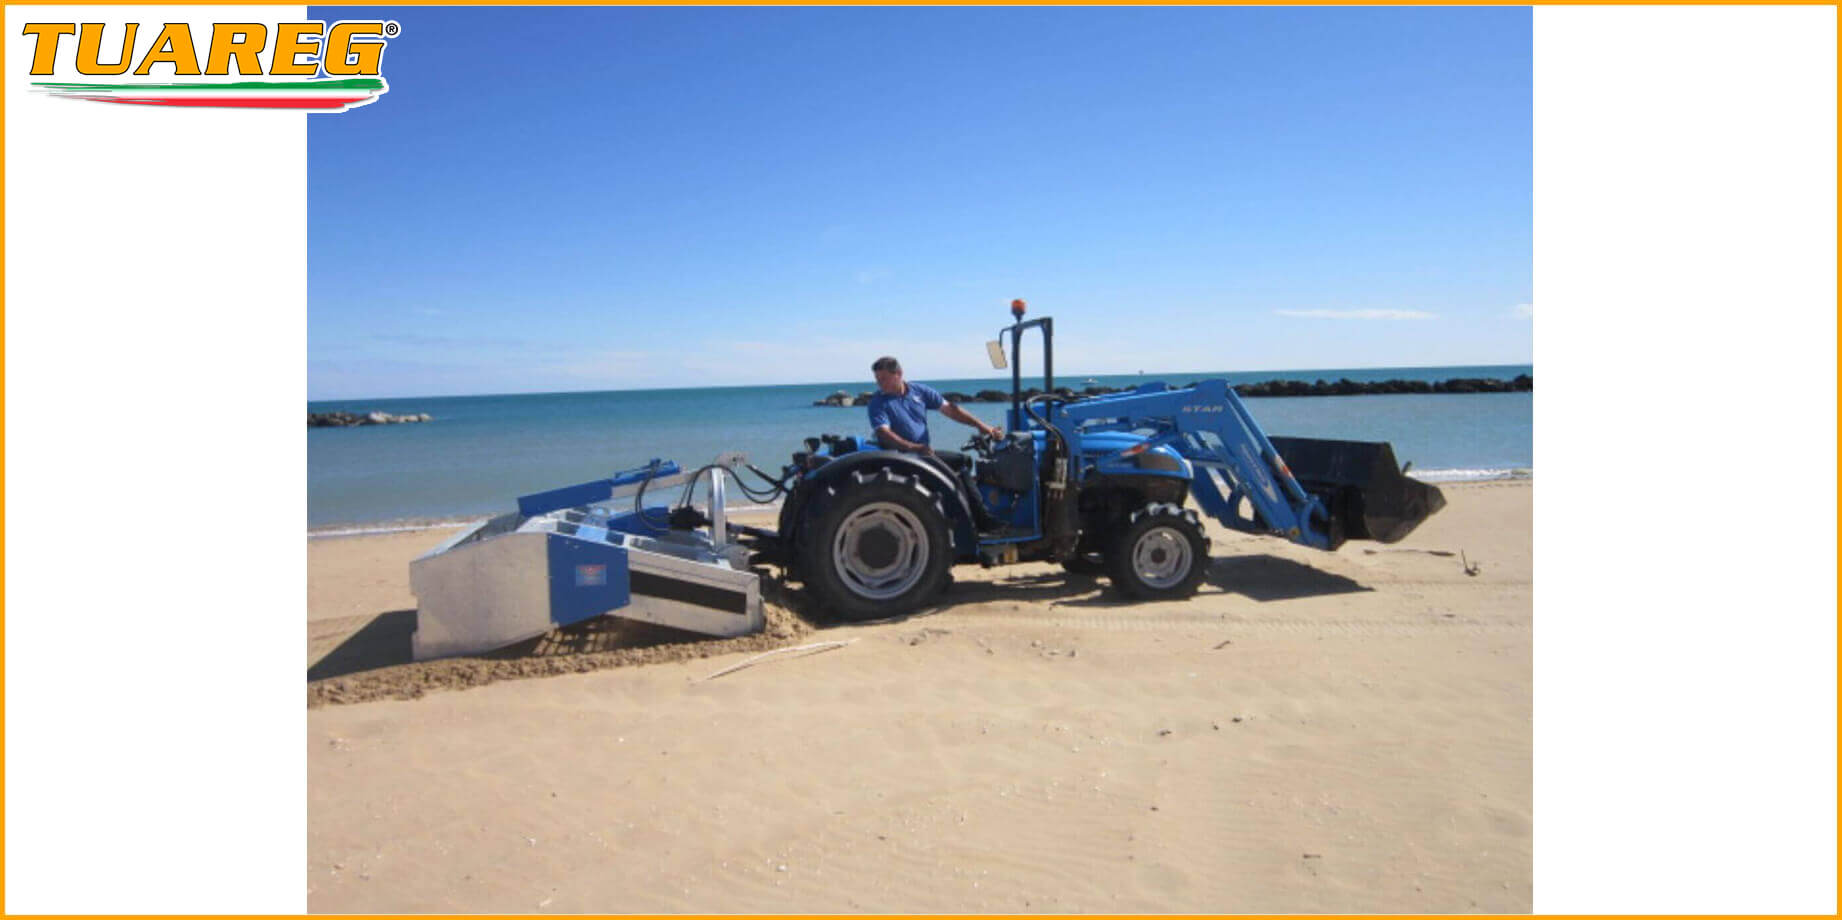 Tuareg EvoMax - Beach Cleaning Machine - Attached to a Tractor